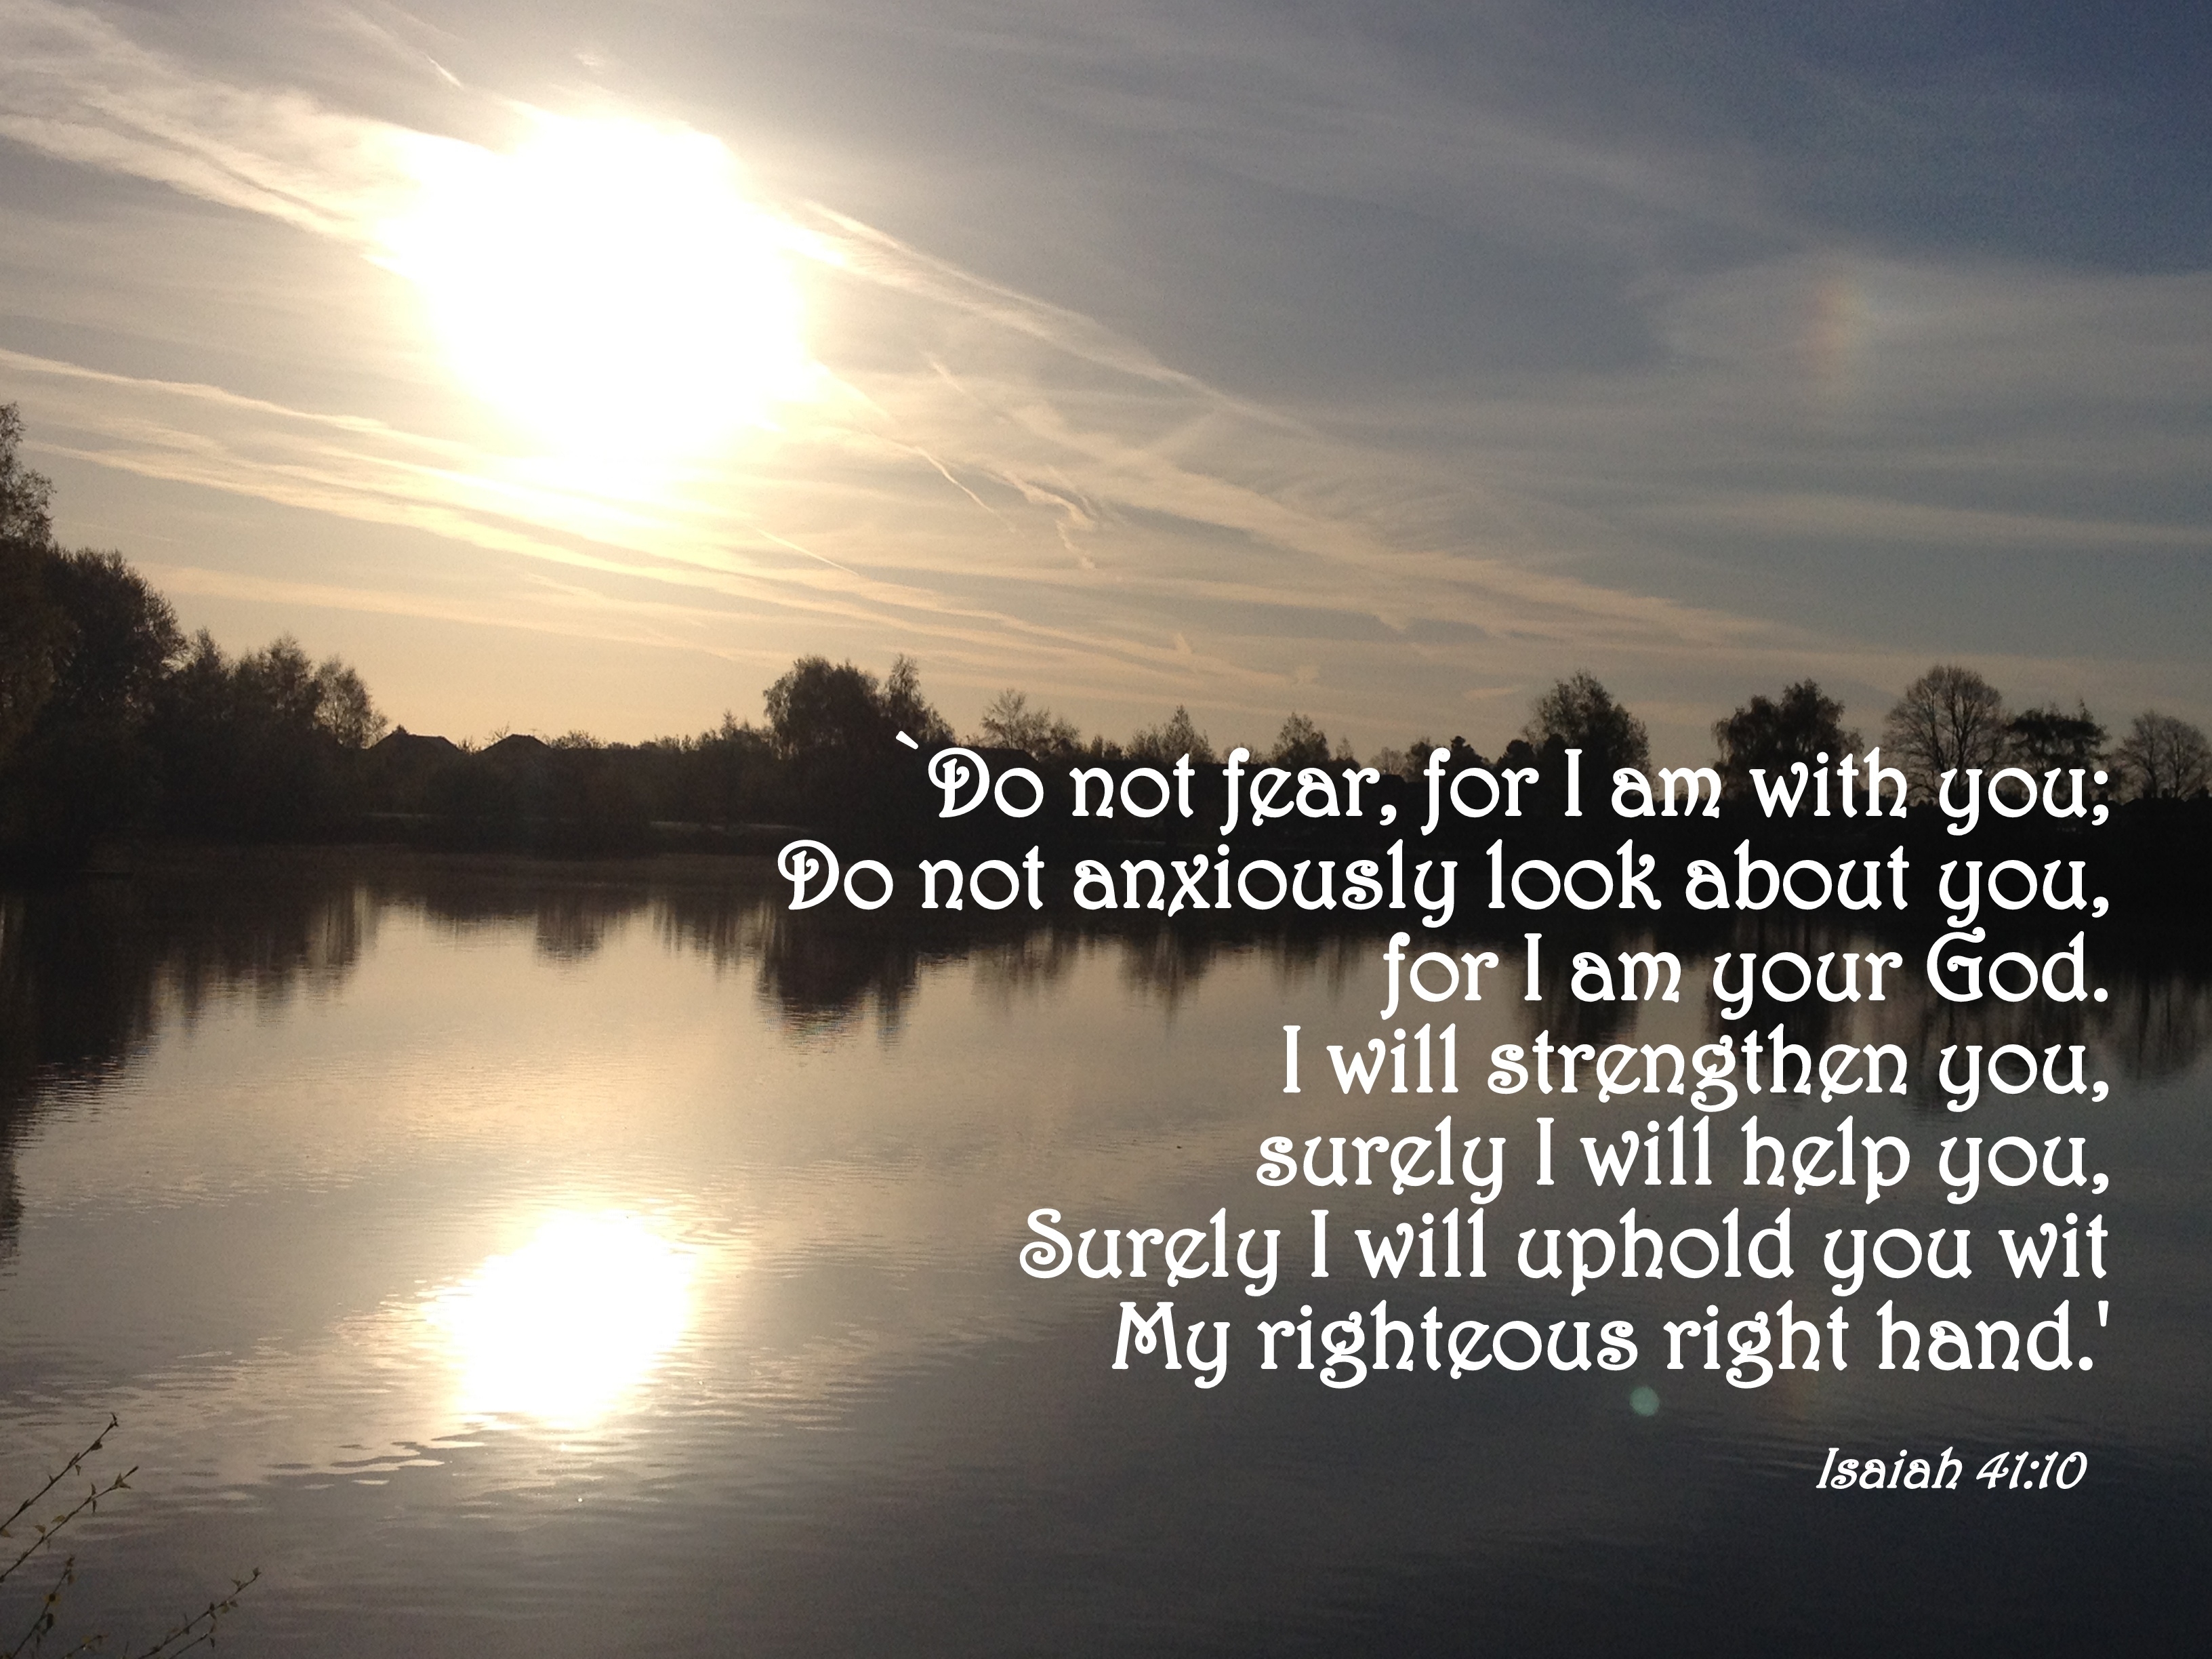 10 Latest Isaiah 4110 Wallpaper FULL HD 1080p For PC